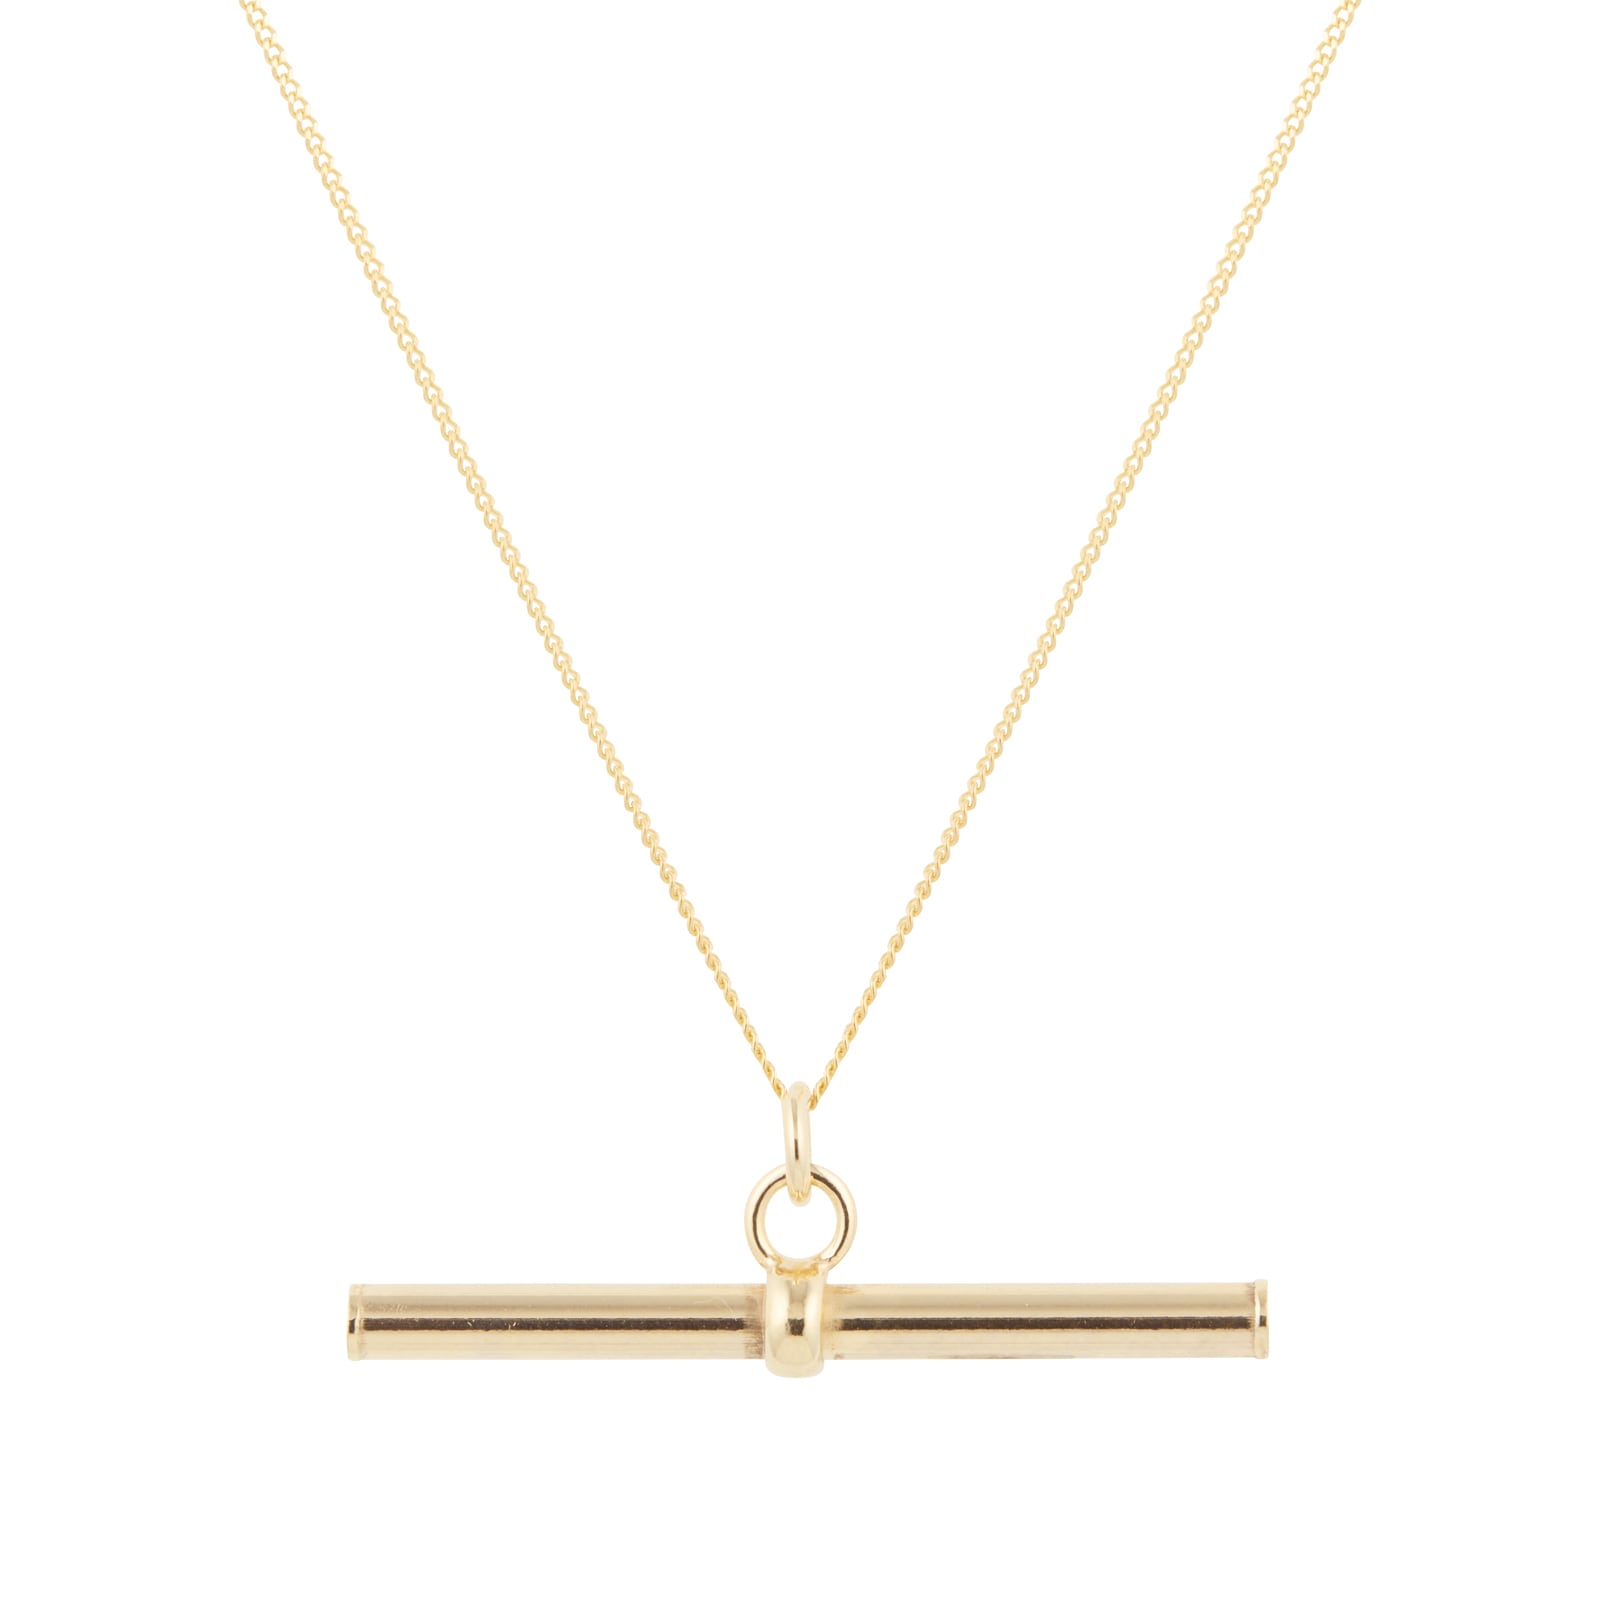 IBB 9ct Gold T-Bar Hollow Curb Chain Necklace, Gold at John Lewis & Partners